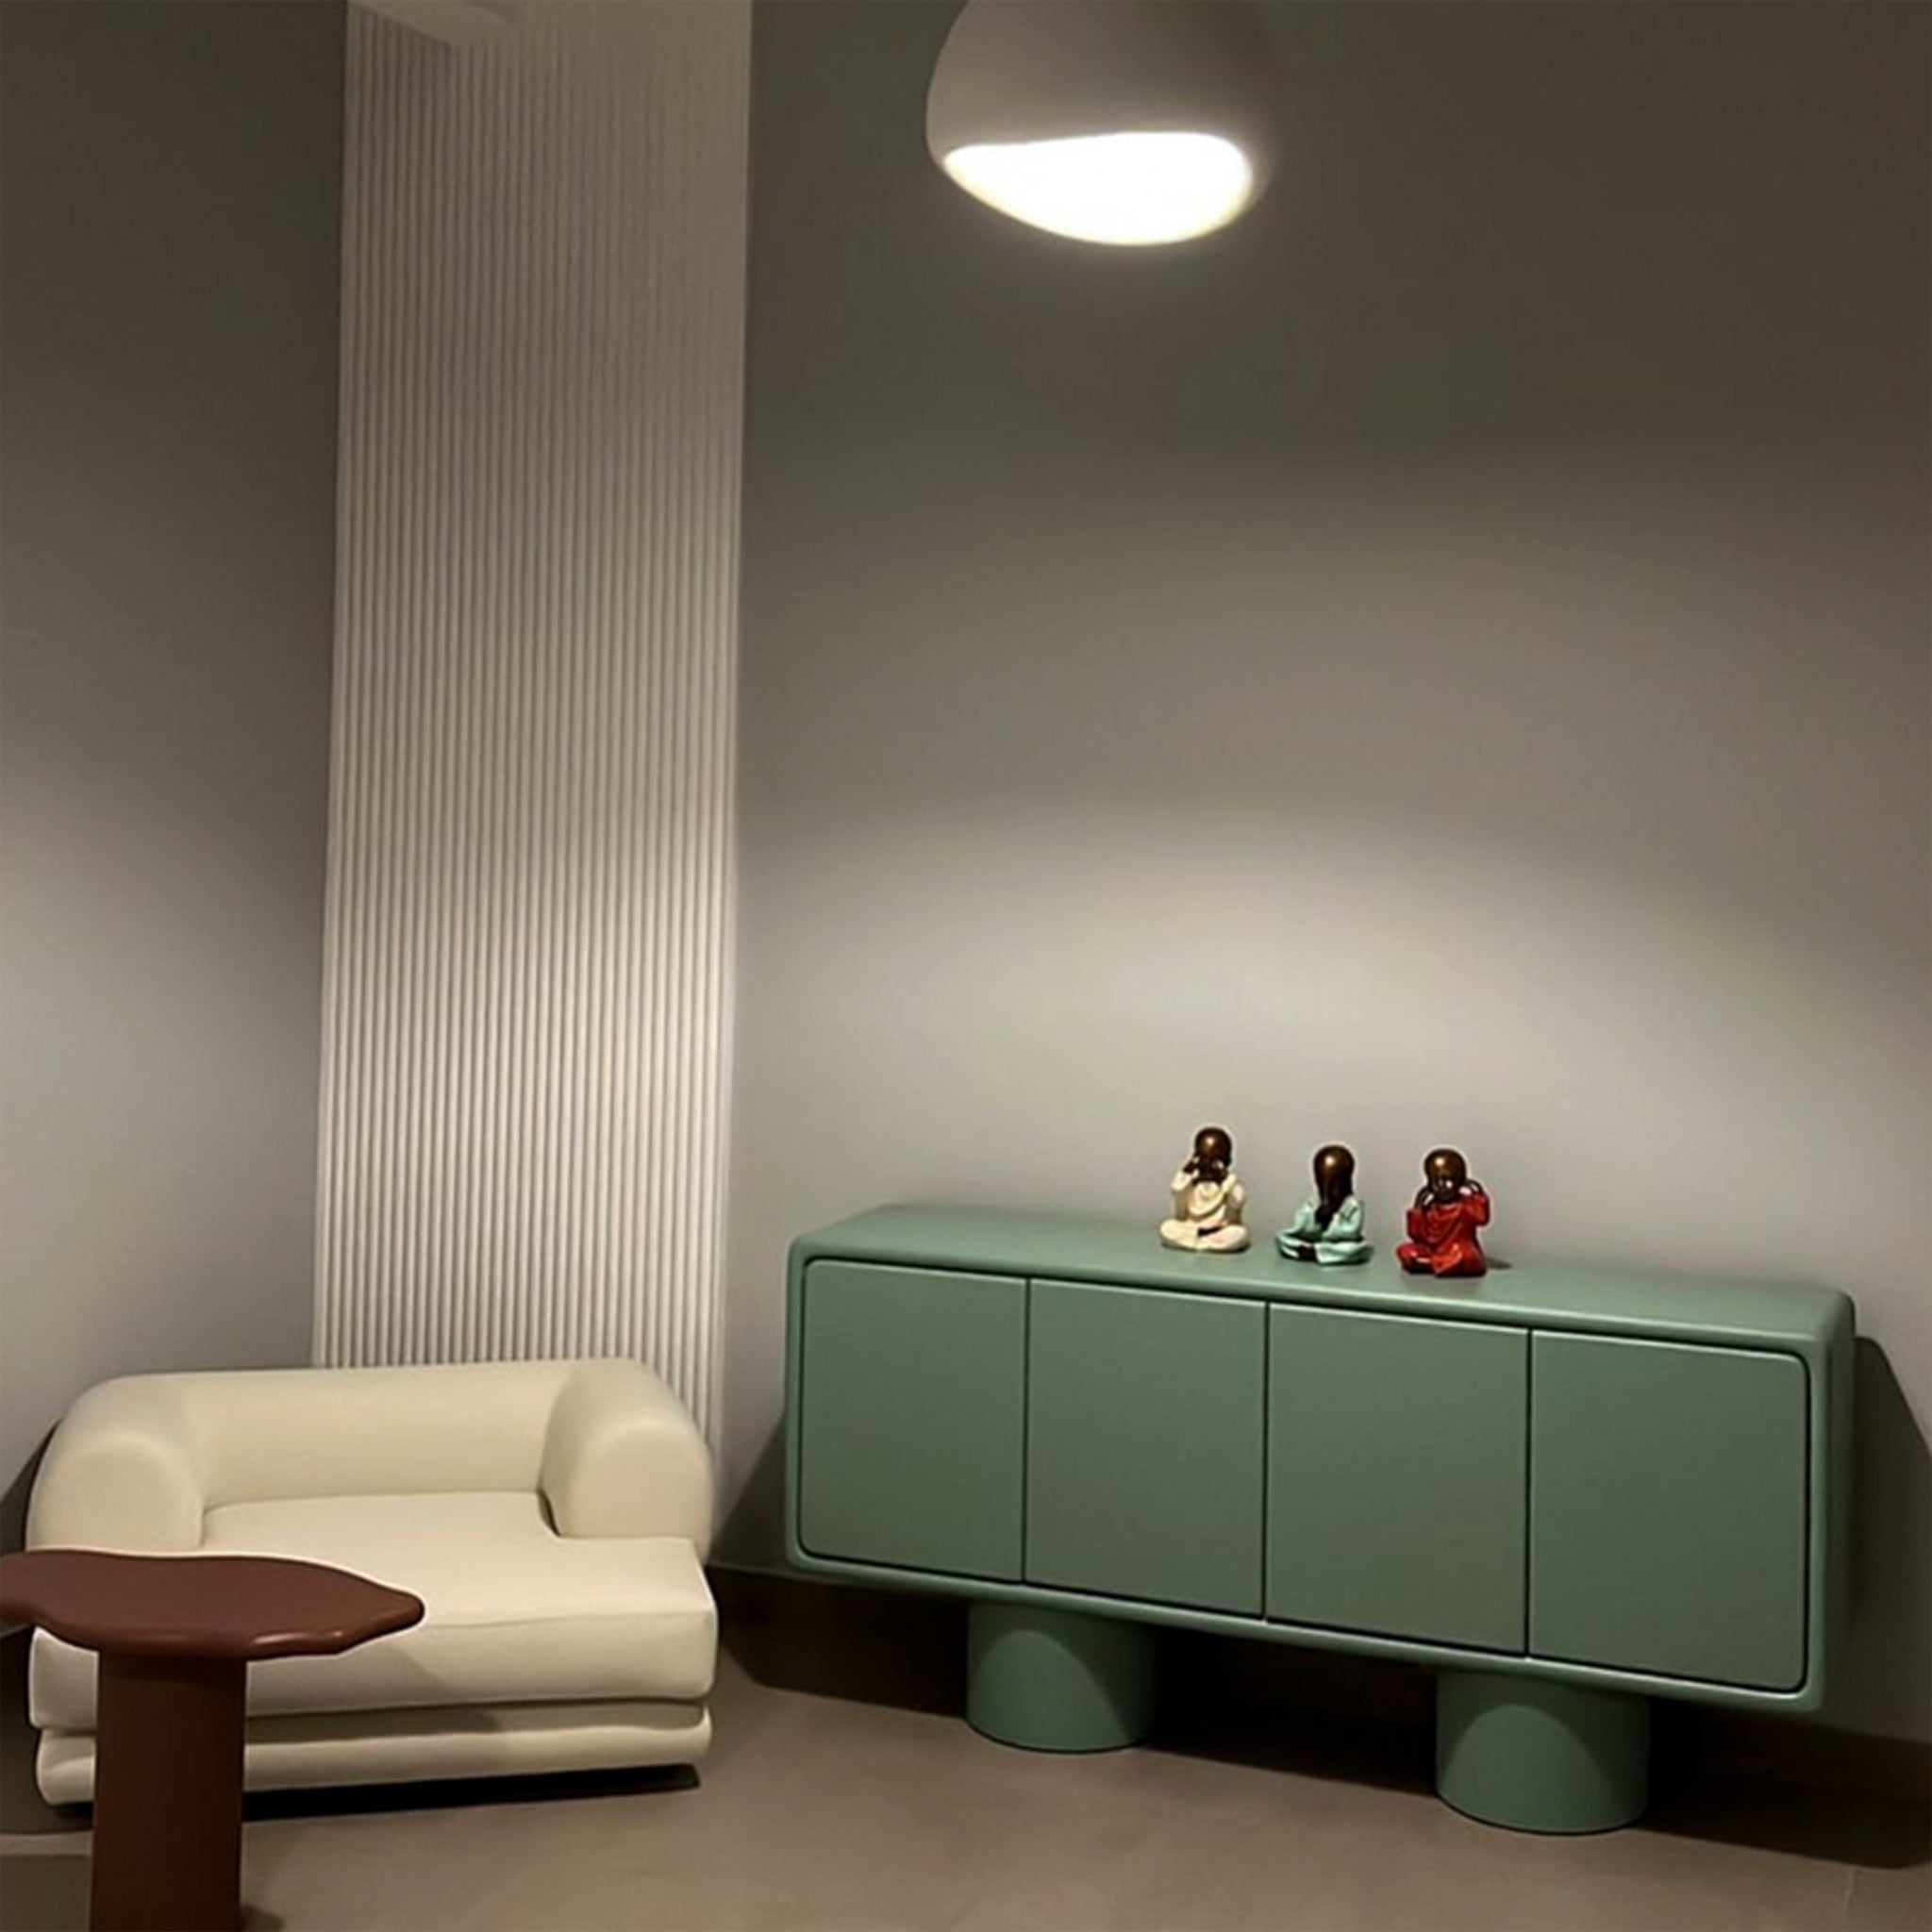 A modern interior featuring a green sideboard with four doors and cylindrical legs, adorned with decorative figurines on top, next to a white armchair and a unique brown side table, illuminated by a pendant light.